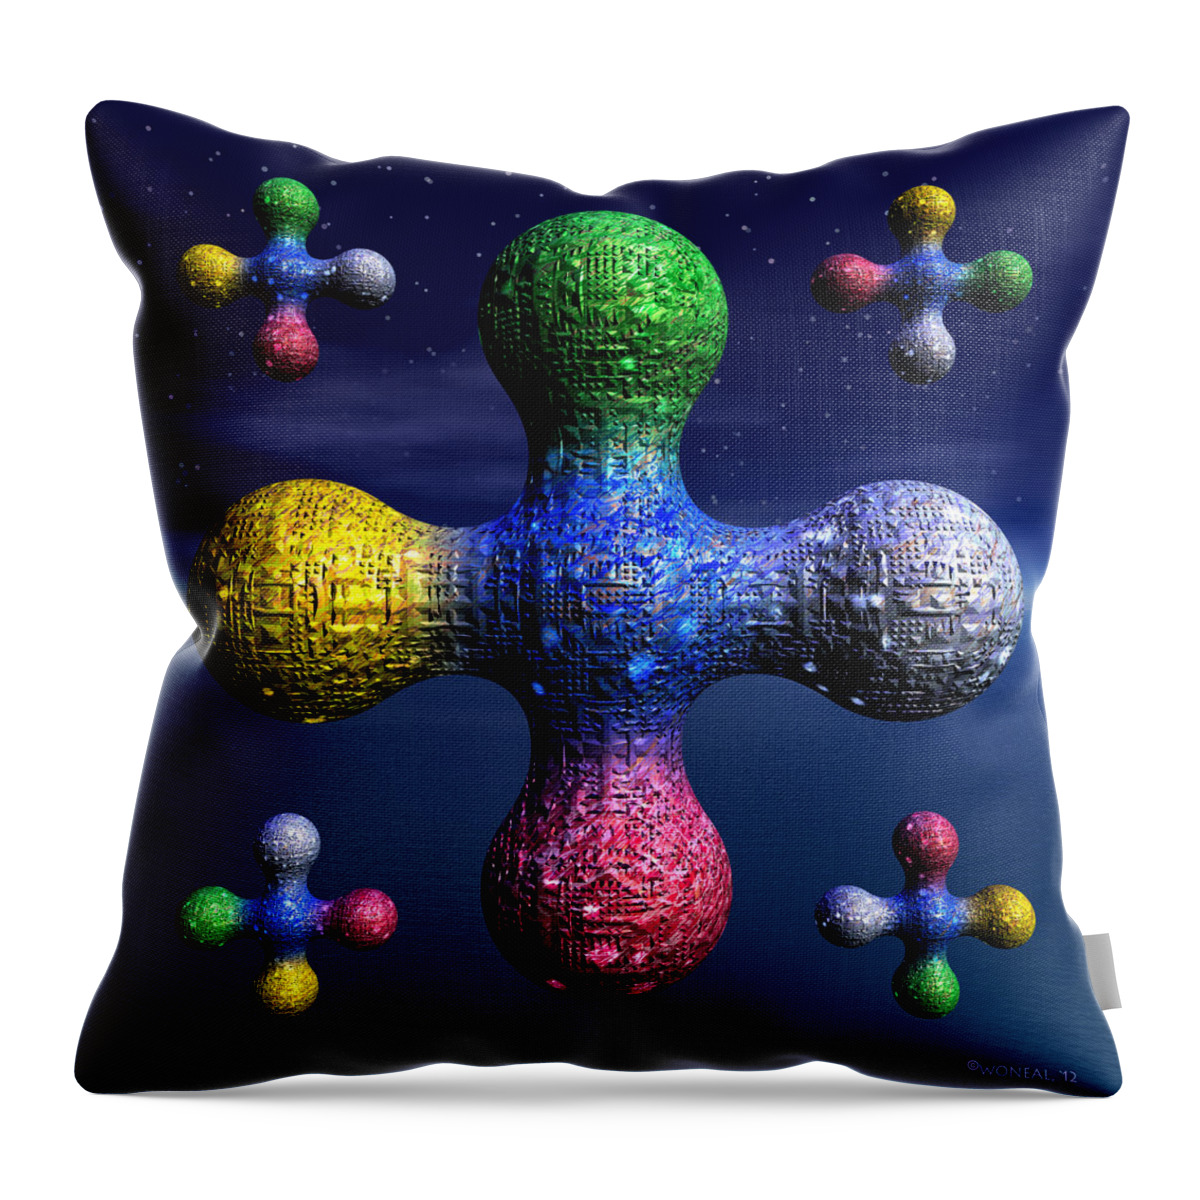 Sci-fi Throw Pillow featuring the digital art The Anomaly by Walter Neal